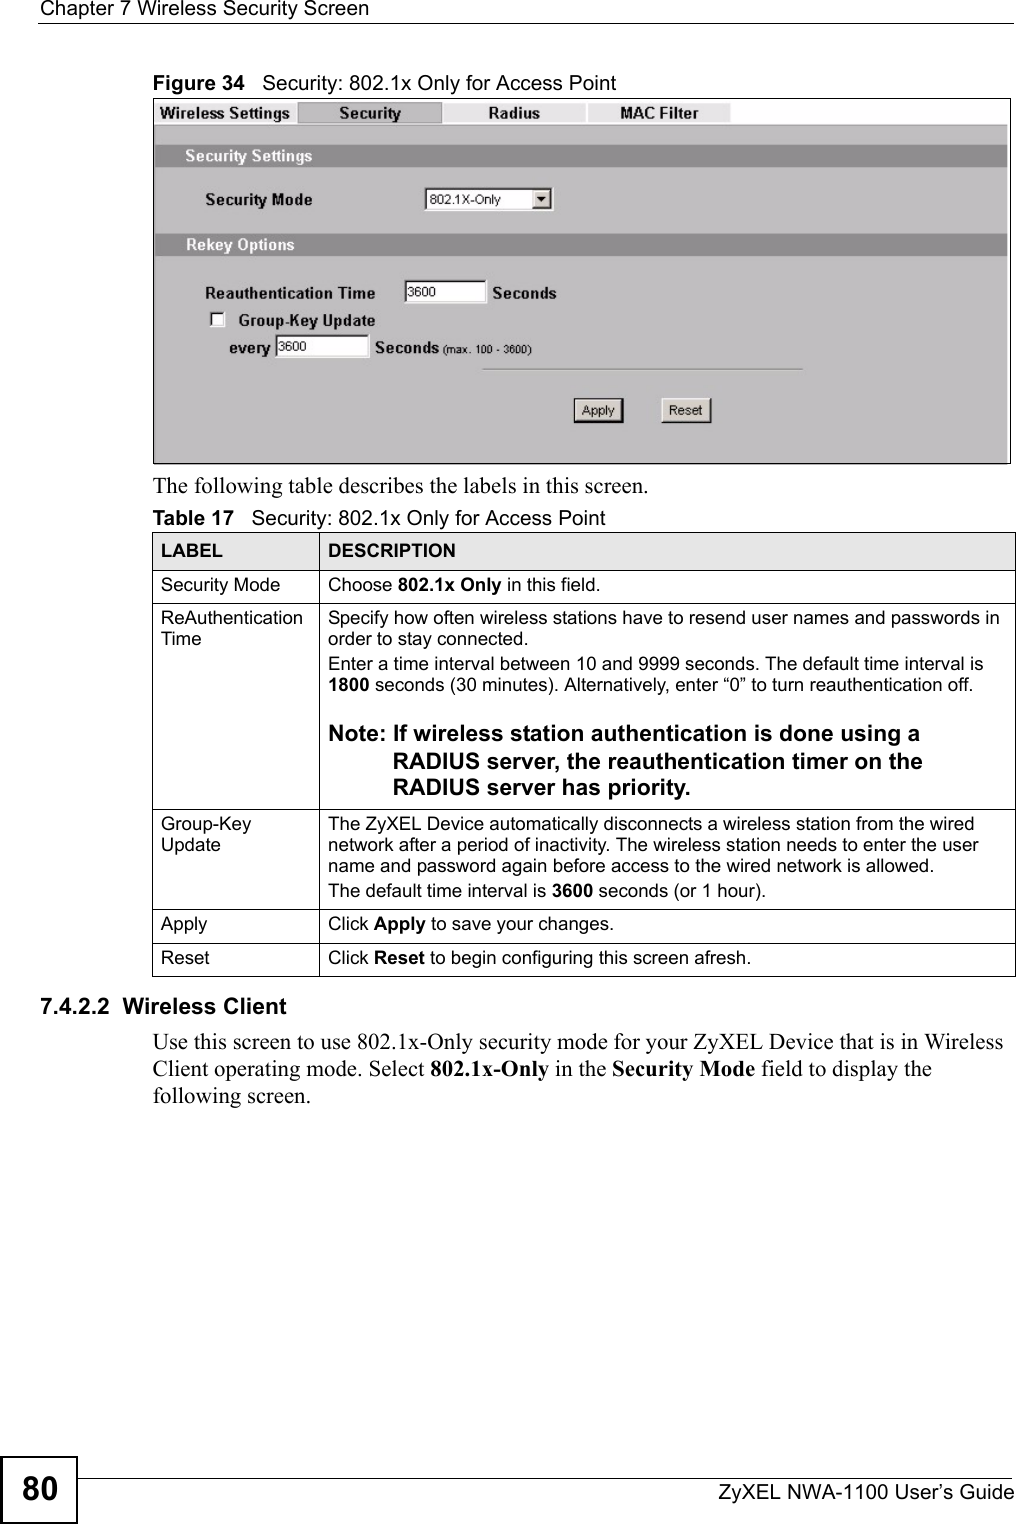 Chapter 7 Wireless Security ScreenZyXEL NWA-1100 User’s Guide80Figure 34   Security: 802.1x Only for Access PointThe following table describes the labels in this screen.7.4.2.2  Wireless ClientUse this screen to use 802.1x-Only security mode for your ZyXEL Device that is in Wireless Client operating mode. Select 802.1x-Only in the Security Mode field to display the following screen.Table 17   Security: 802.1x Only for Access PointLABEL DESCRIPTIONSecurity Mode Choose 802.1x Only in this field.ReAuthentication Time Specify how often wireless stations have to resend user names and passwords in order to stay connected. Enter a time interval between 10 and 9999 seconds. The default time interval is 1800 seconds (30 minutes). Alternatively, enter “0” to turn reauthentication off. Note: If wireless station authentication is done using a RADIUS server, the reauthentication timer on the RADIUS server has priority. Group-Key UpdateThe ZyXEL Device automatically disconnects a wireless station from the wired network after a period of inactivity. The wireless station needs to enter the user name and password again before access to the wired network is allowed. The default time interval is 3600 seconds (or 1 hour).Apply Click Apply to save your changes.Reset Click Reset to begin configuring this screen afresh.